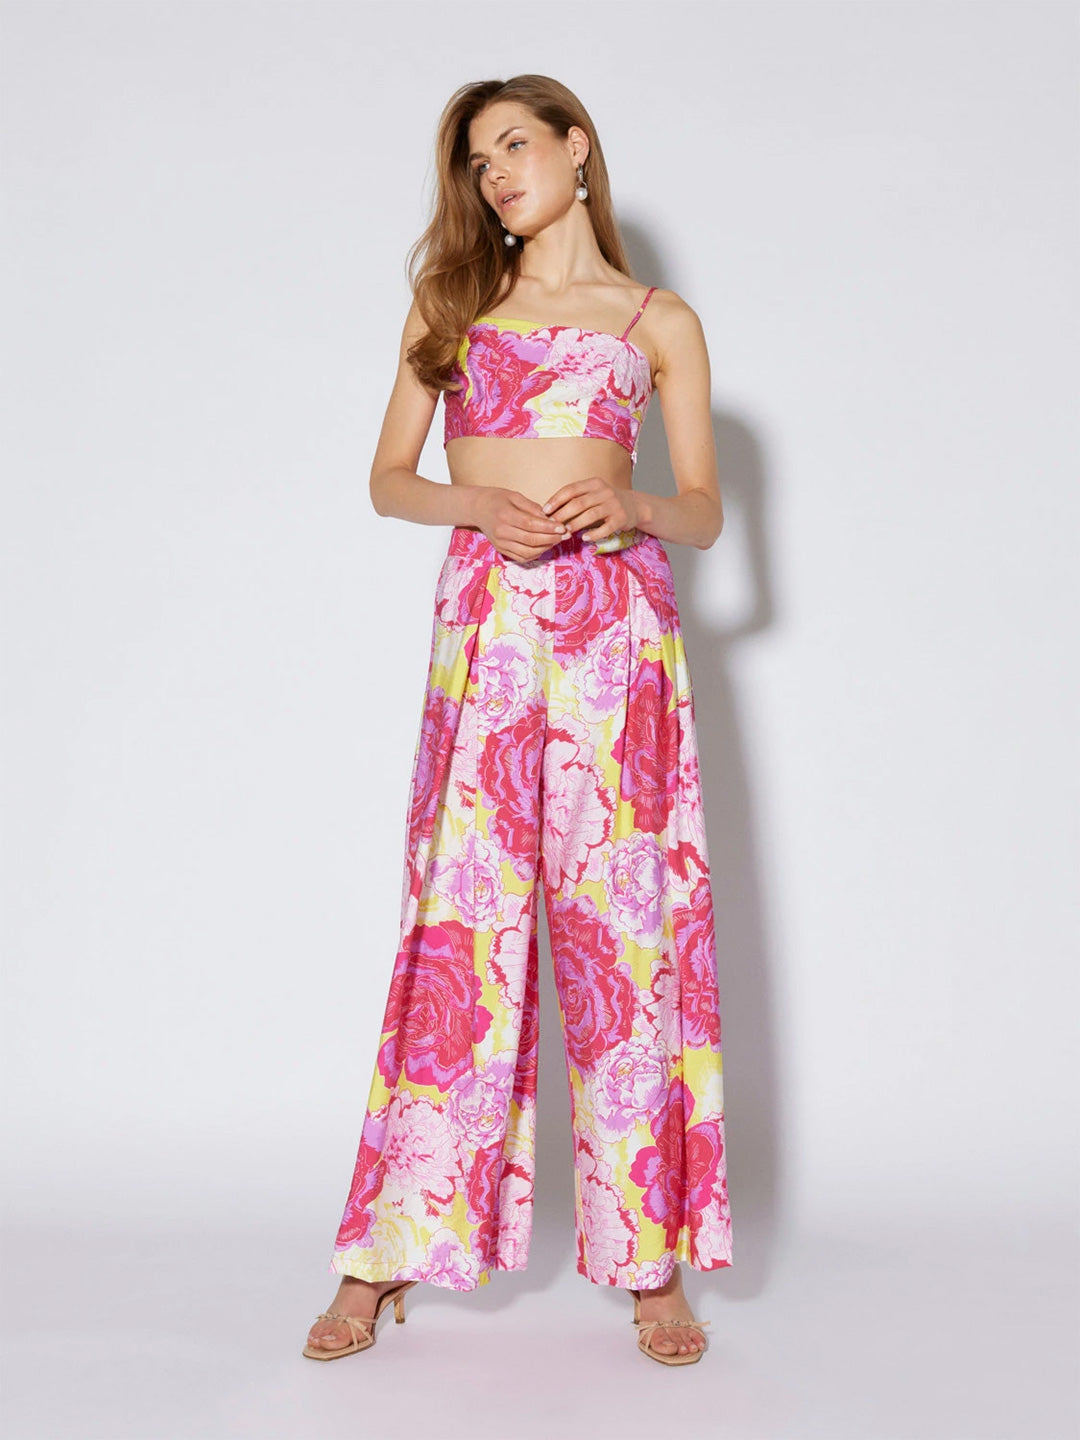 Somethingnew coordinated fuchsia floral top and trousers